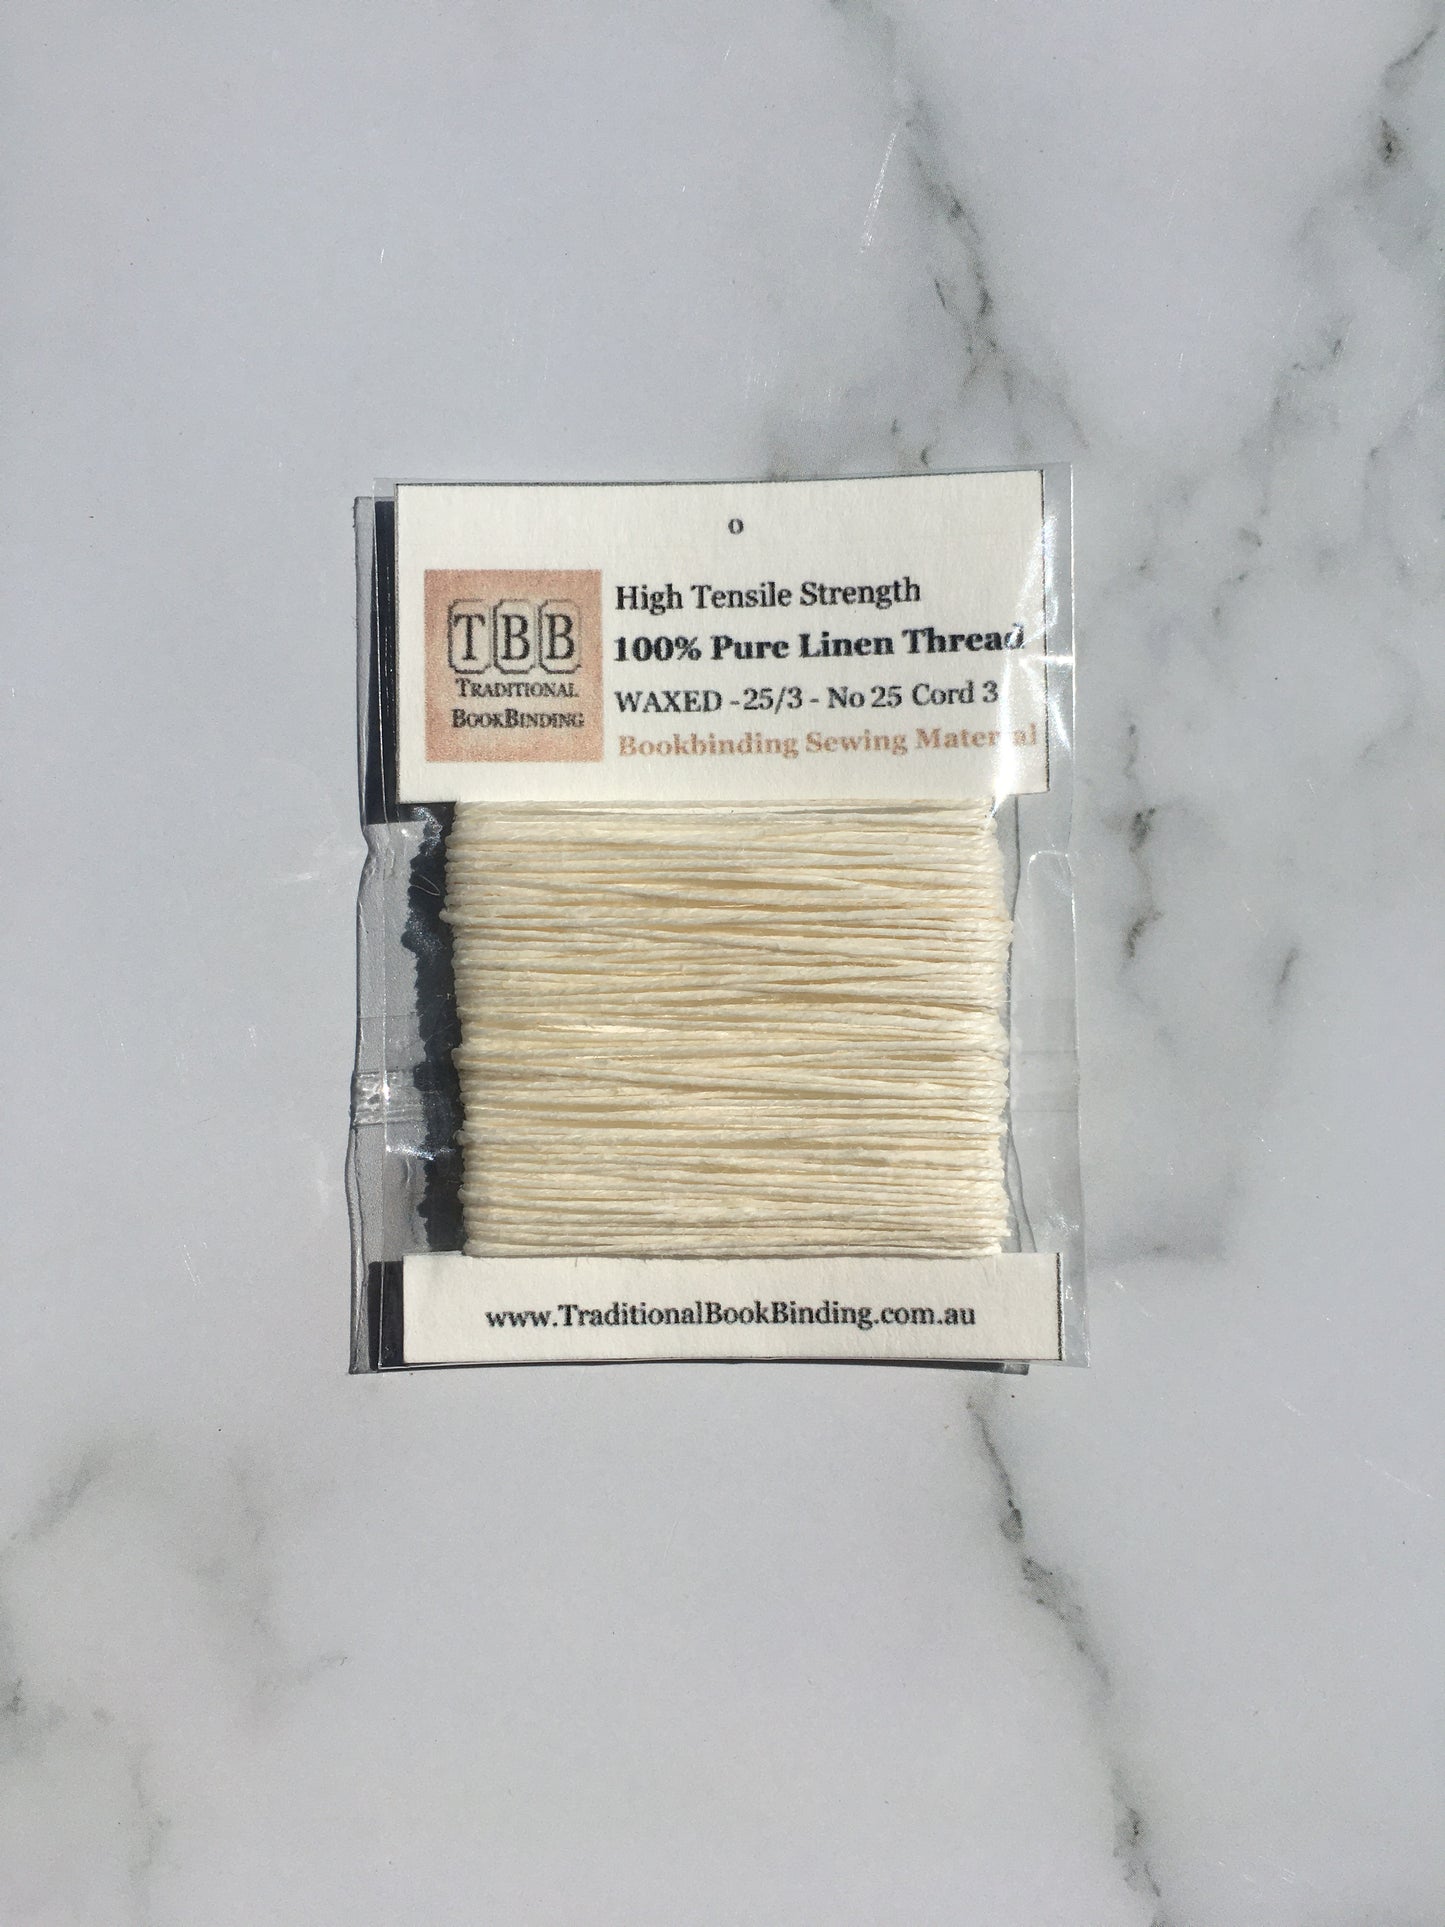 Bookbinding Sewing Set- 3 packs of 100% Natural Linen Threads Coated In Wax and 8 Sturdy Needles